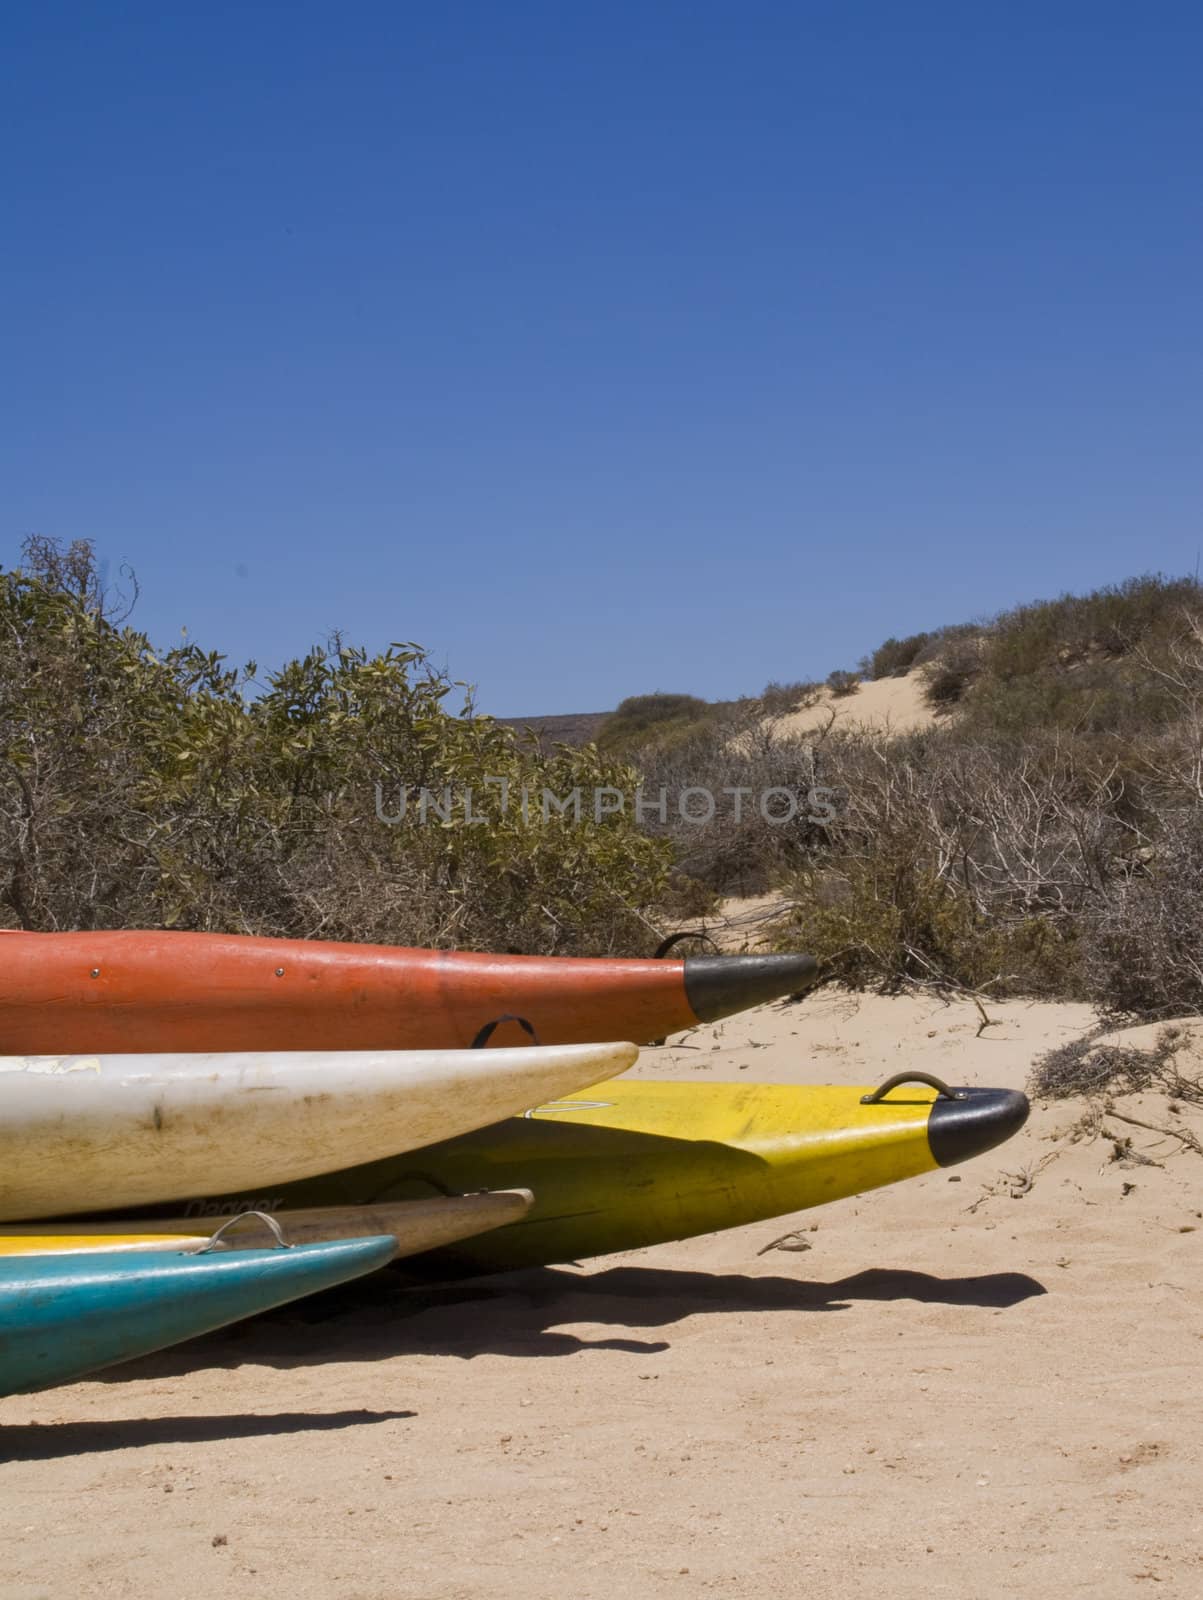 Canoe tips in dunes. by Claudine